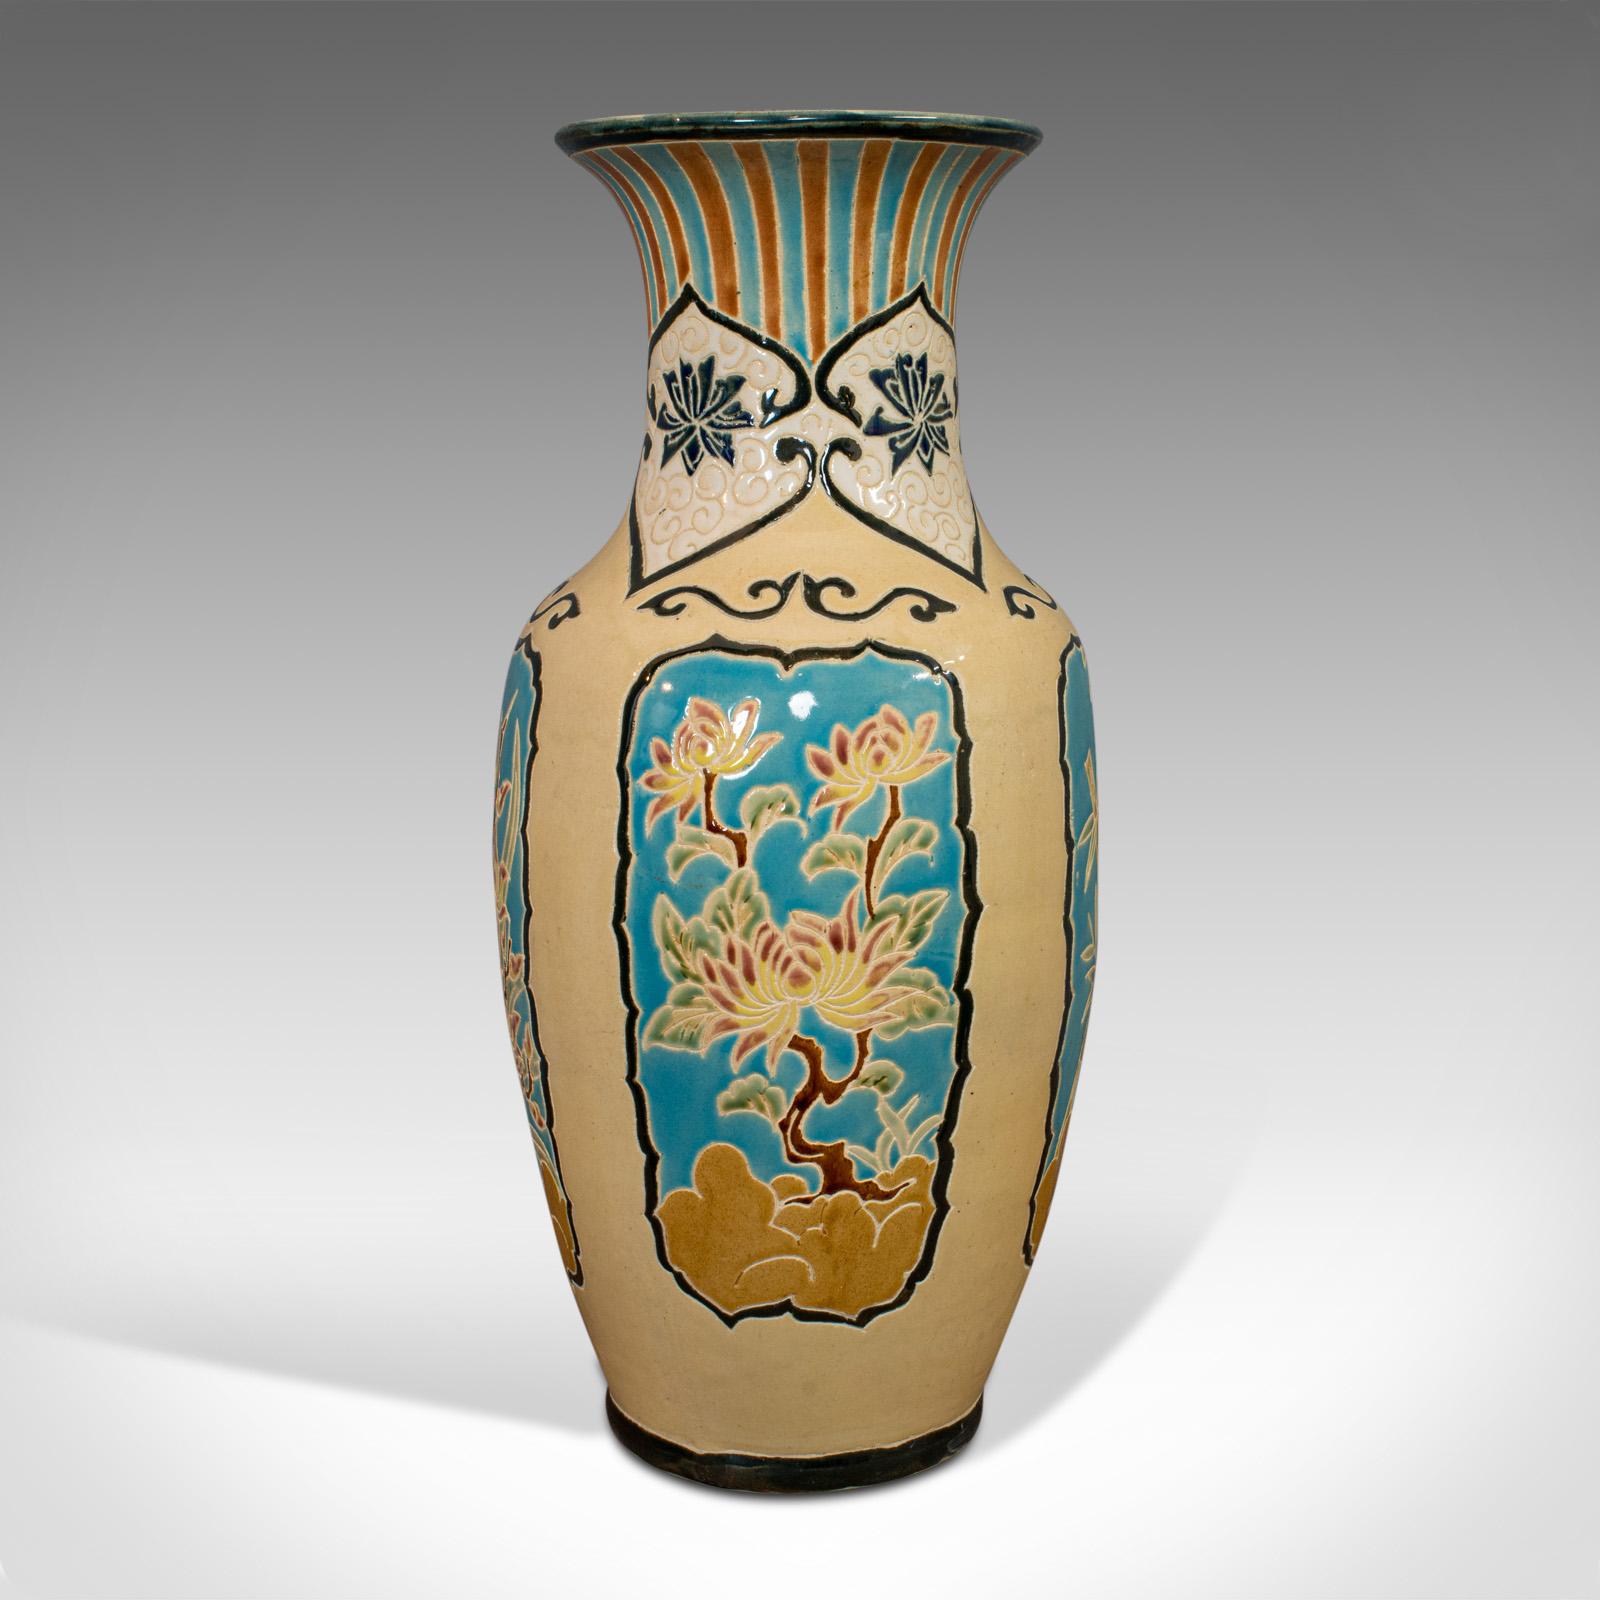 This is a large vintage decorative vase. An oriental, ceramic urn or hallway stick stand, dating to the late 20th century, circa 1980.

Vibrant palette and appealing panel decoration
Displays a desirable aged patina
Ceramic in good order, free